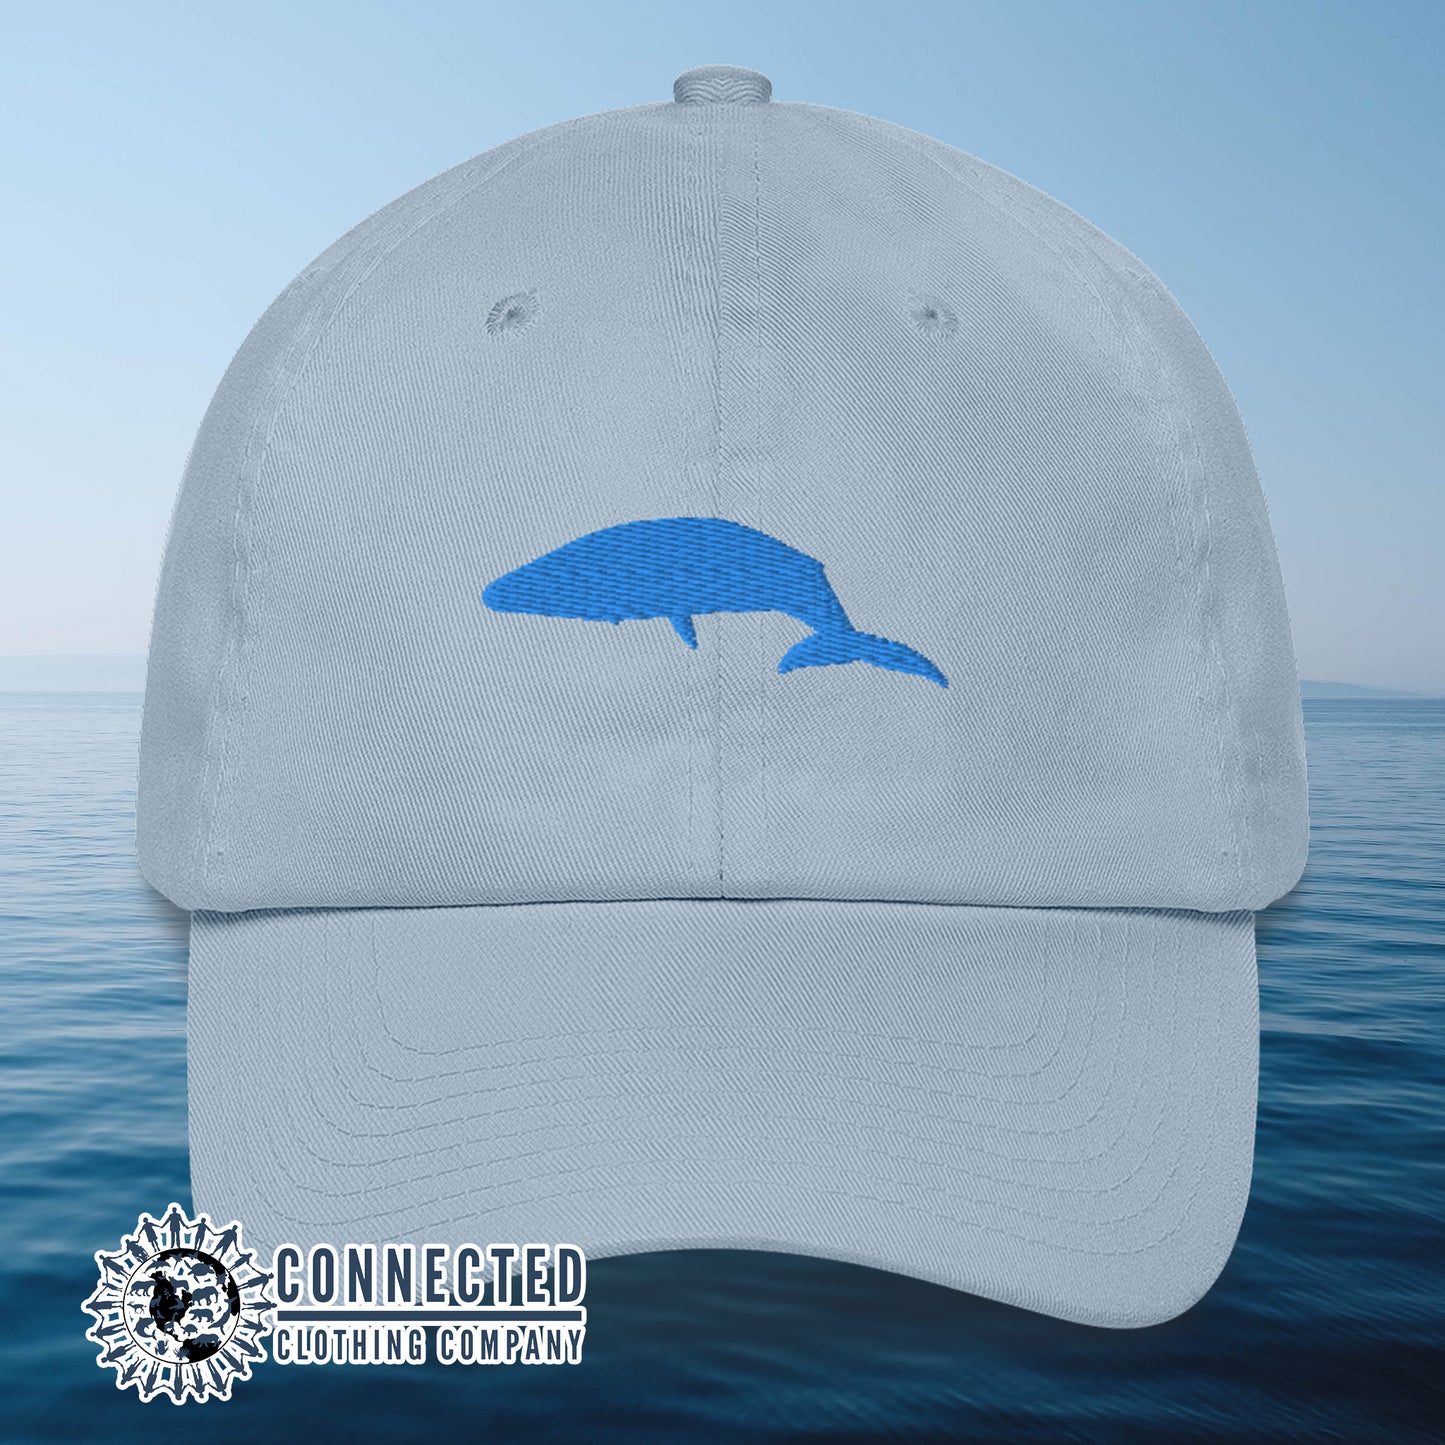 Blue Blue Whale Cotton Cap - sweetsherriloudesigns - 10% of profits donated to Mission Blue ocean conservation